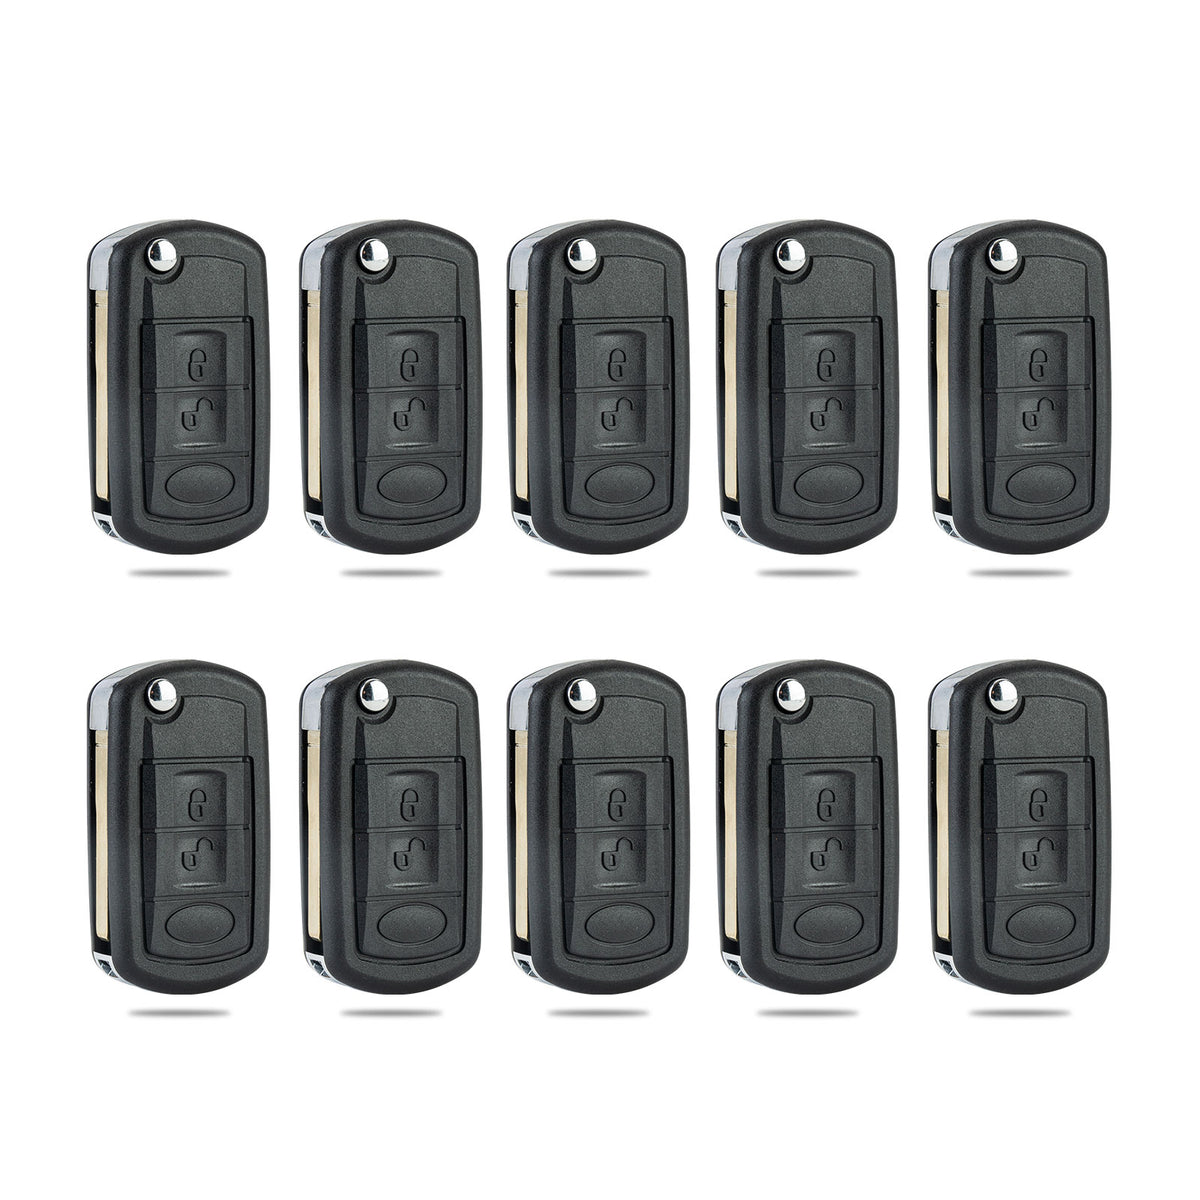 Lots of 10 Extra-Partss Remote Car Key Fob Replacement for Land Rover NT8-15K6014CFFTXA fits 2005 2006 2007 2008 2009 LR3